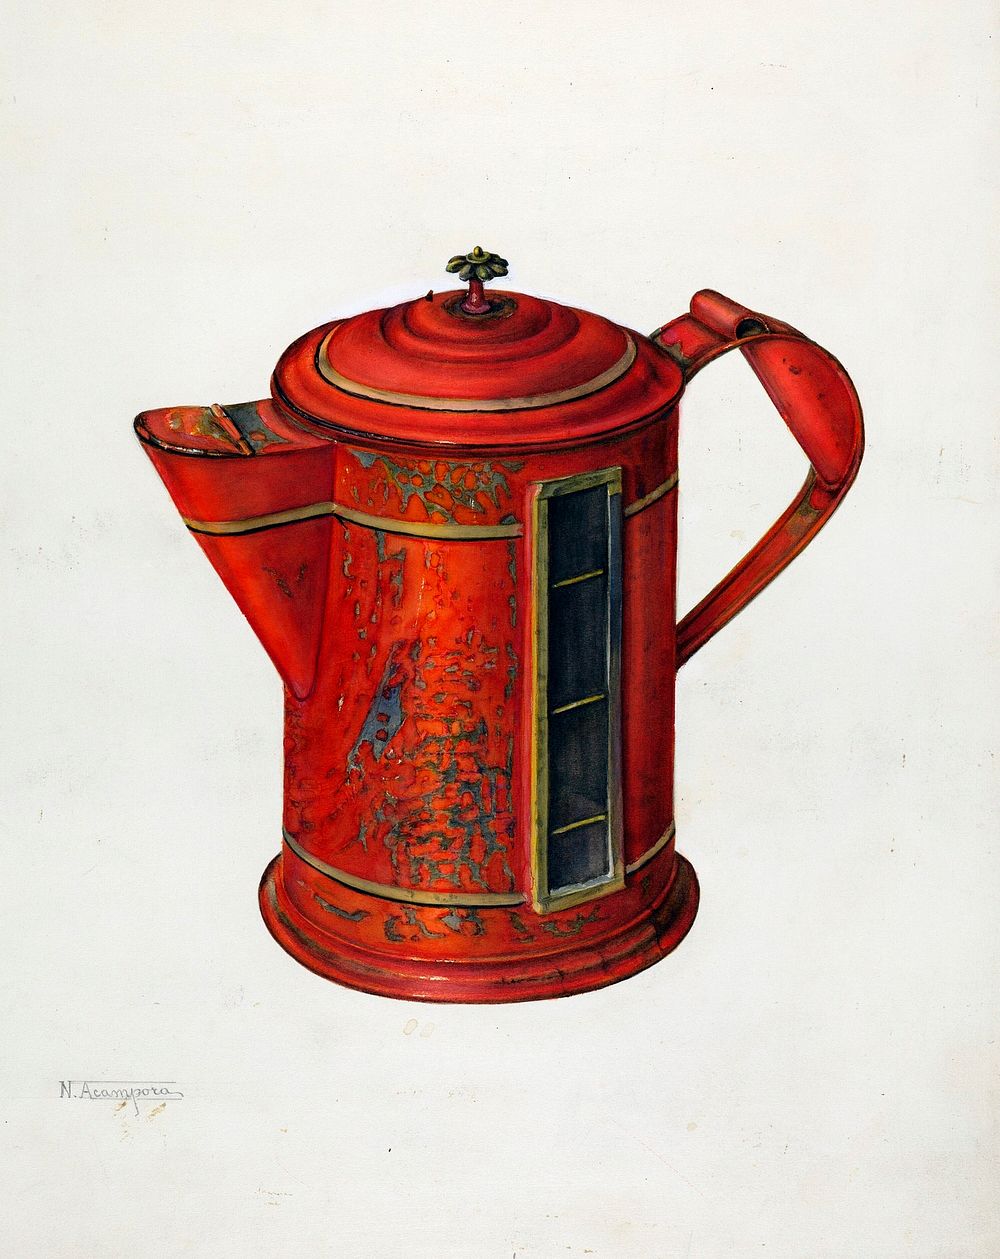 Toleware Coffee Pot (1935&ndash;1942) by Nicholas Acampora. Original from The National Gallery of Art. Digitally enhanced by…